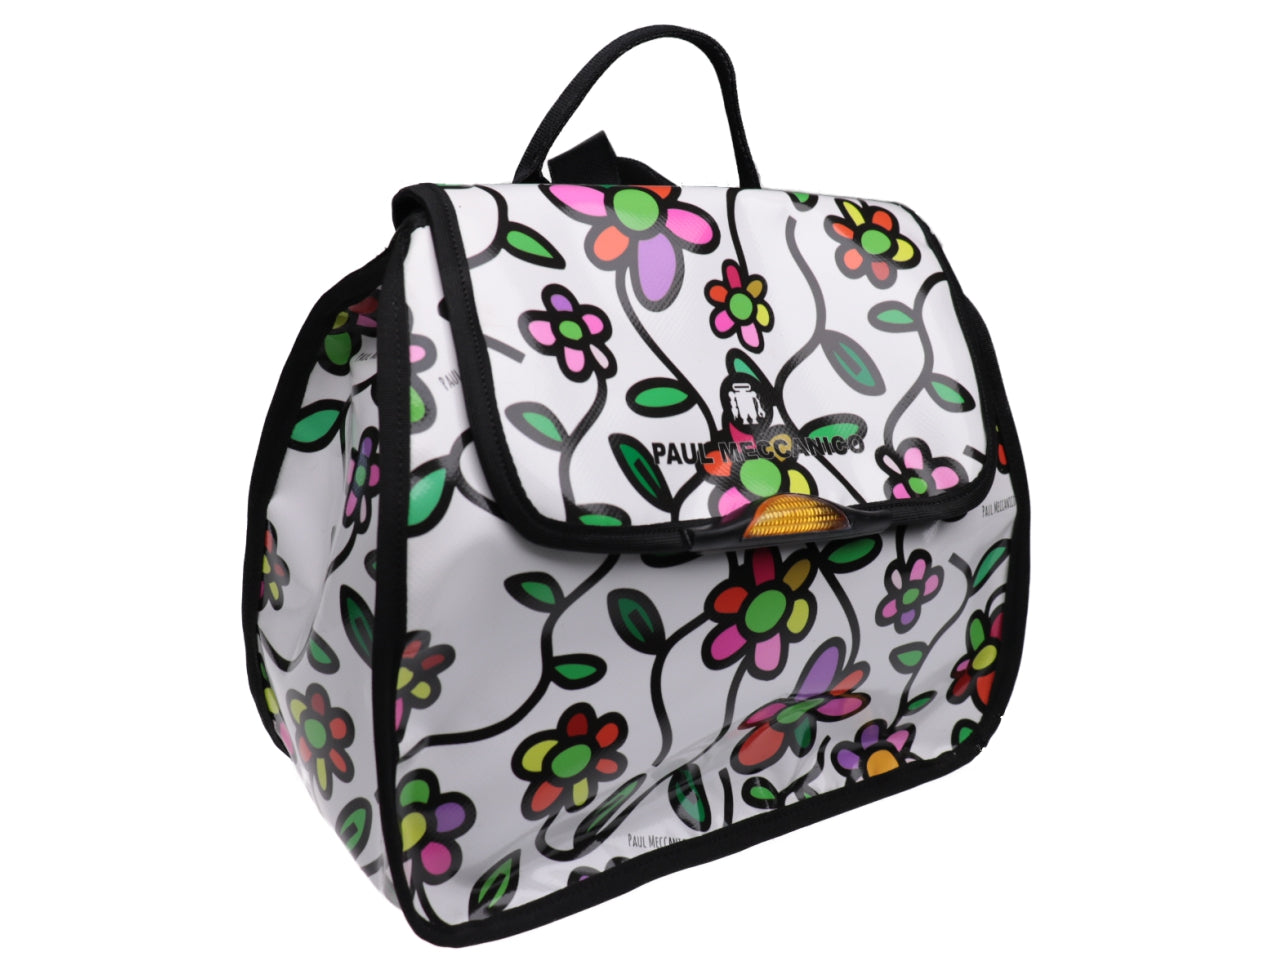 WOMEN'S "BACK BAG" WHITE WITH FLORAL FANTASY. MODEL PULP MADE OF LORRY TARPAULIN. - Limited Edition Paul Meccanico